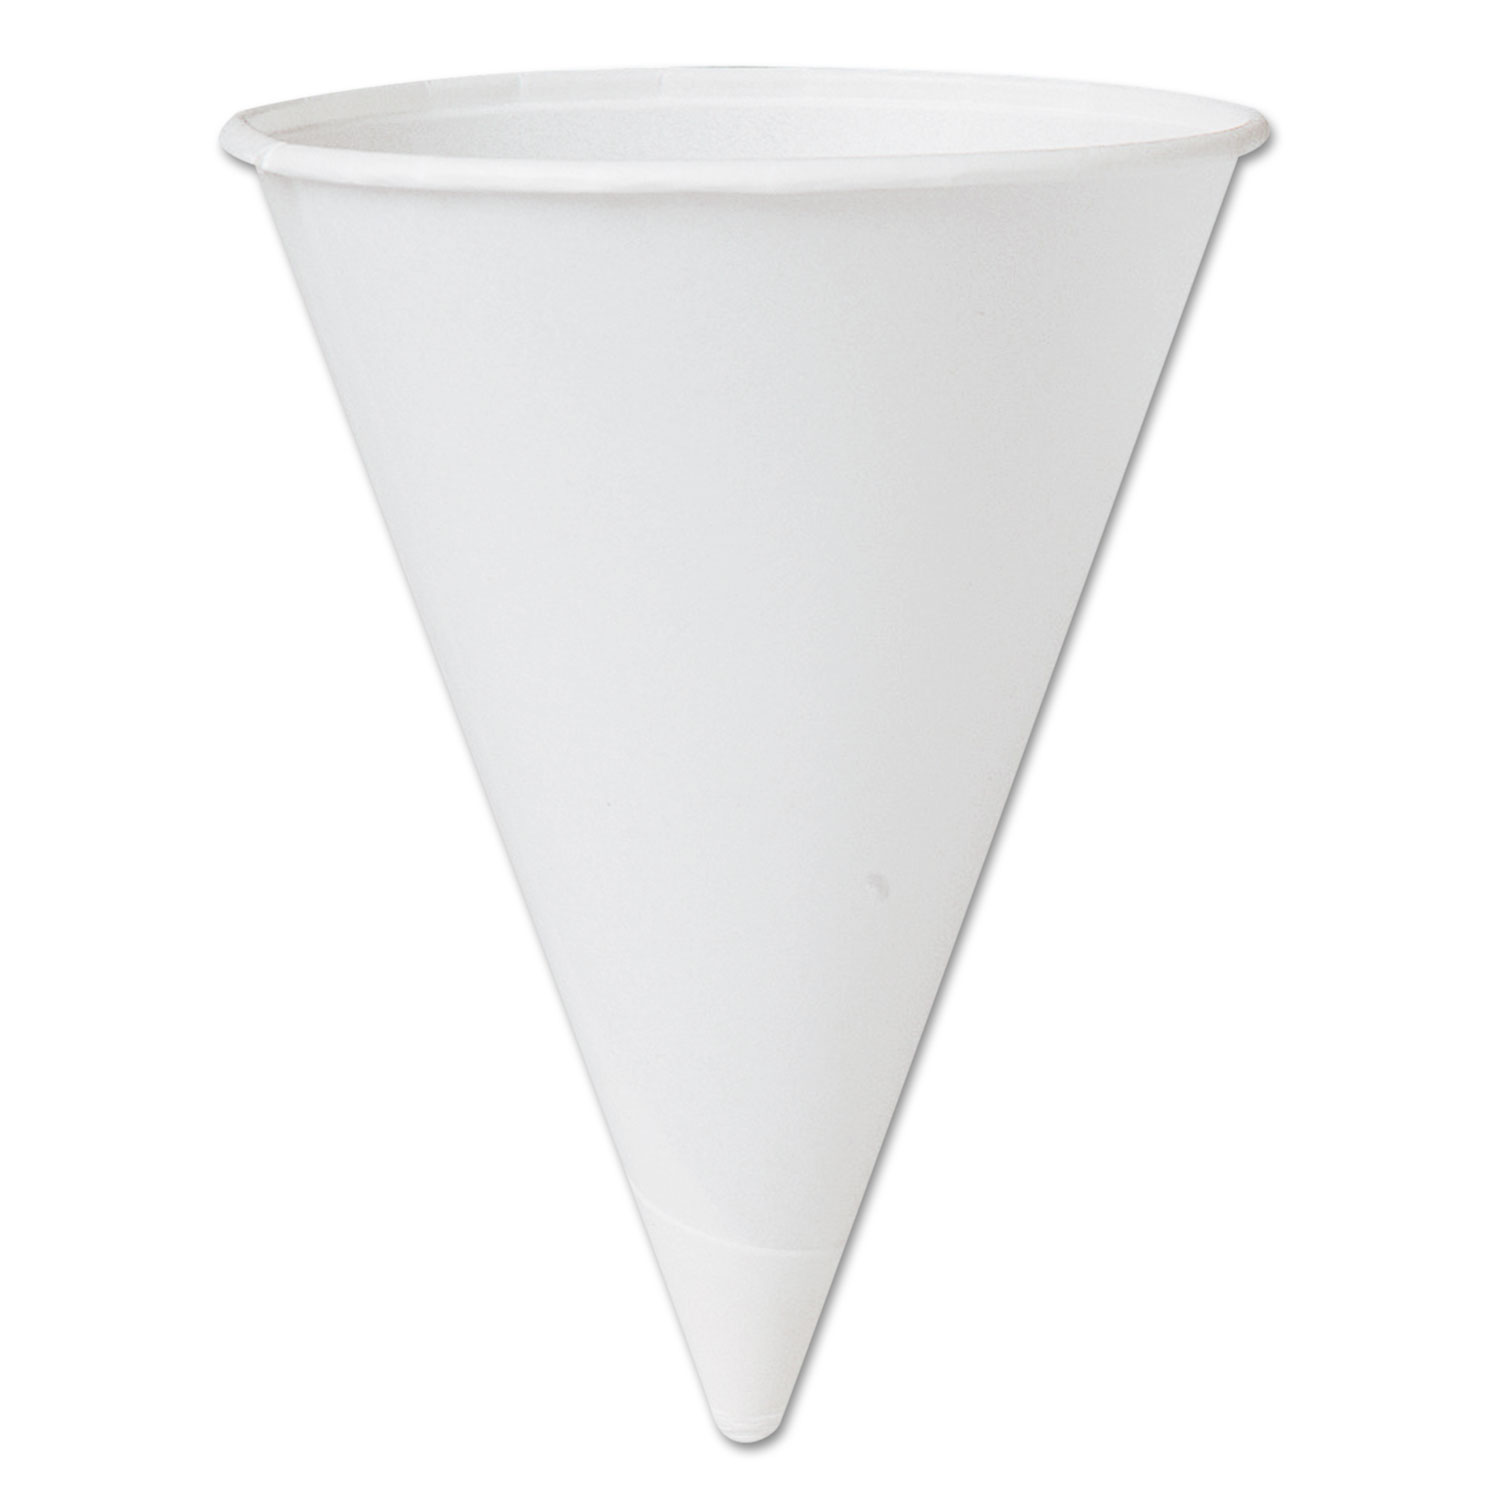  Dart 42BR-2050 Bare Treated Paper Cone Water Cups, 4 1/4 oz., White, 200/Bag (SCC42BR) 